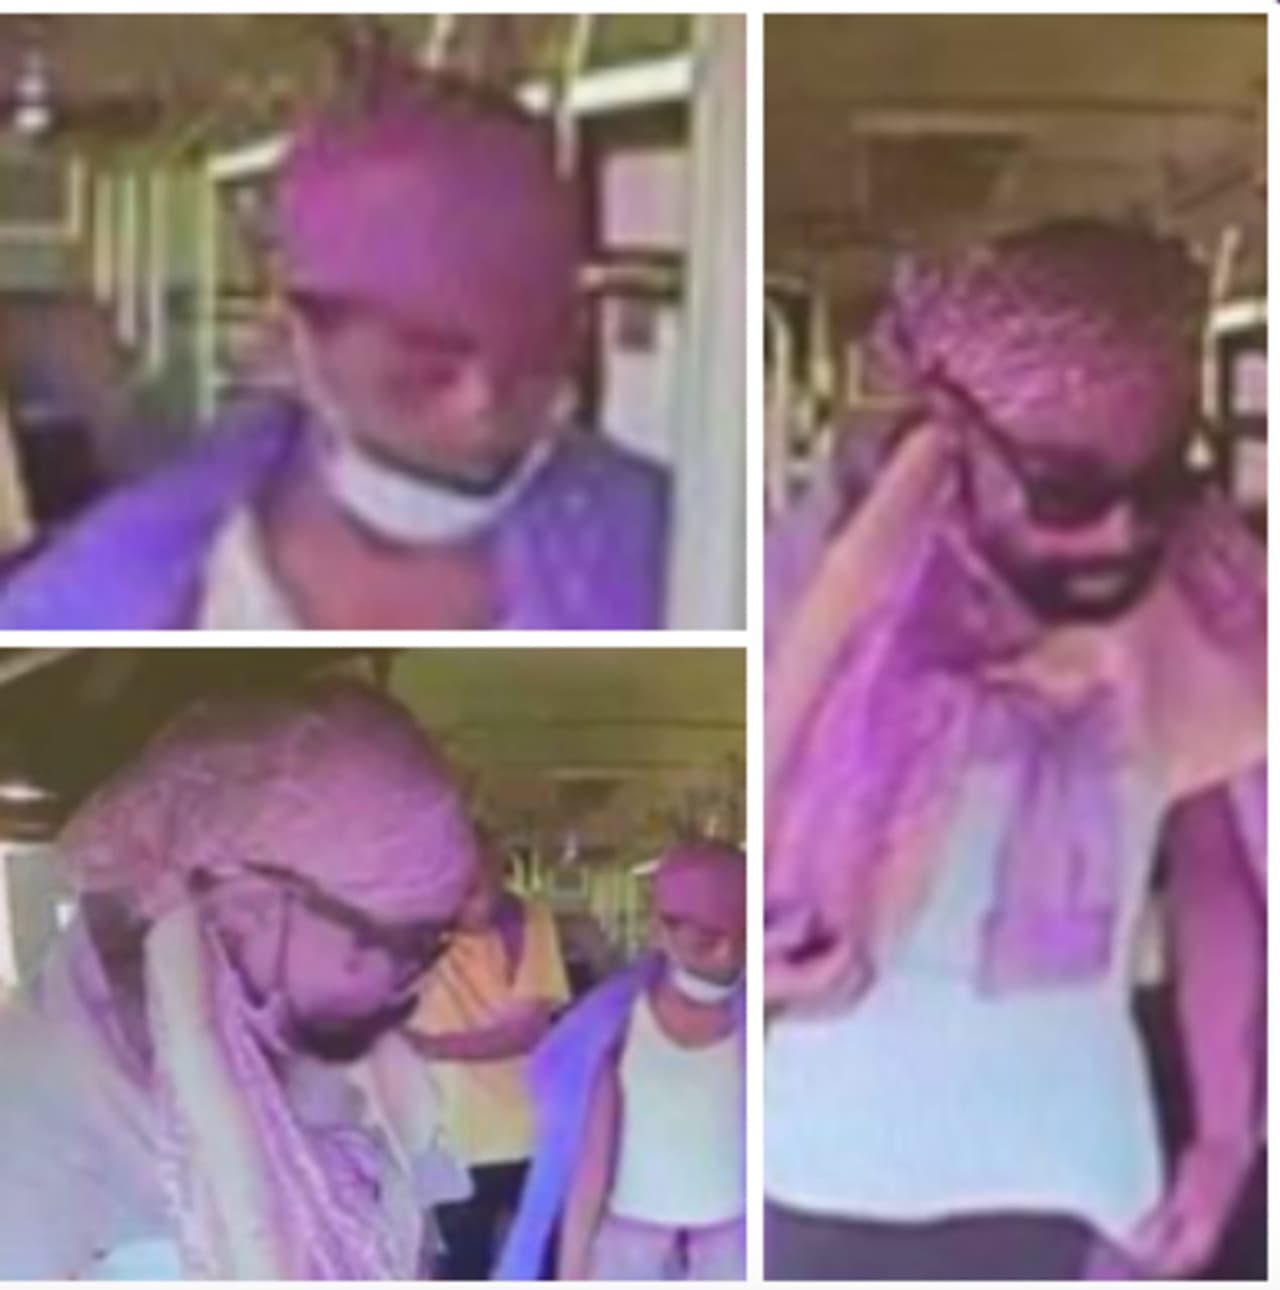 Authorities are seeking two men wanted for assaulting an NJ Transit bus driver who wouldn't accept a used bus ticket.